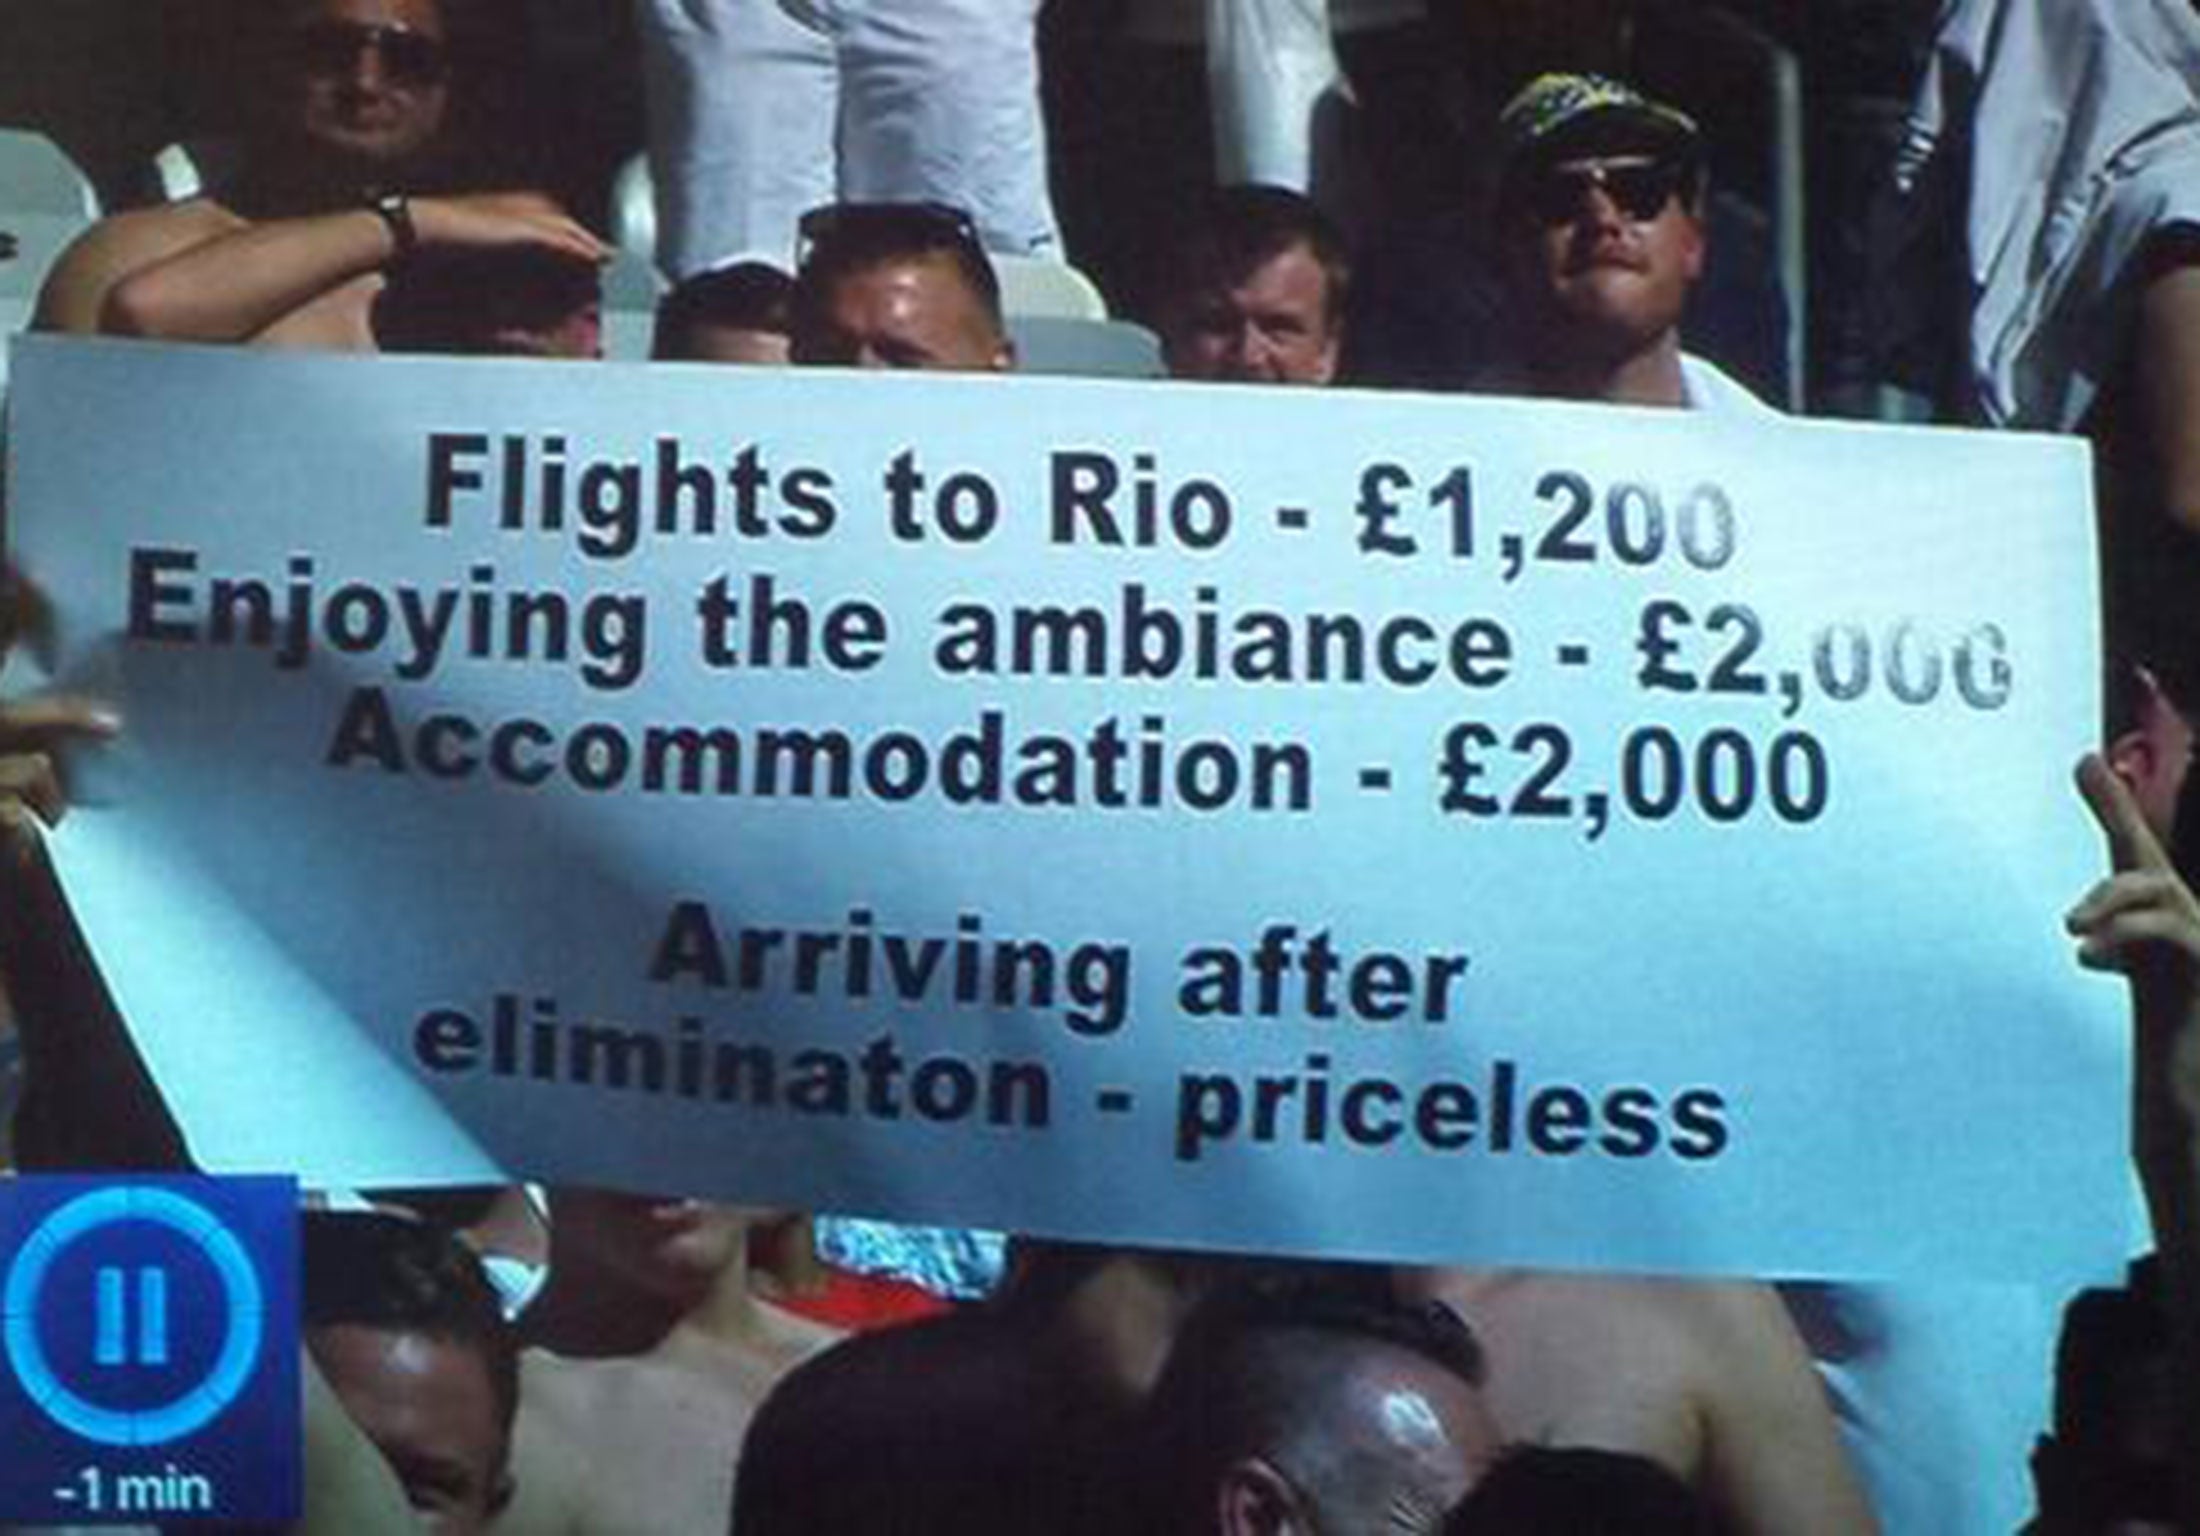 An England fan displayed this comical banner during their final group game against Costa Rica